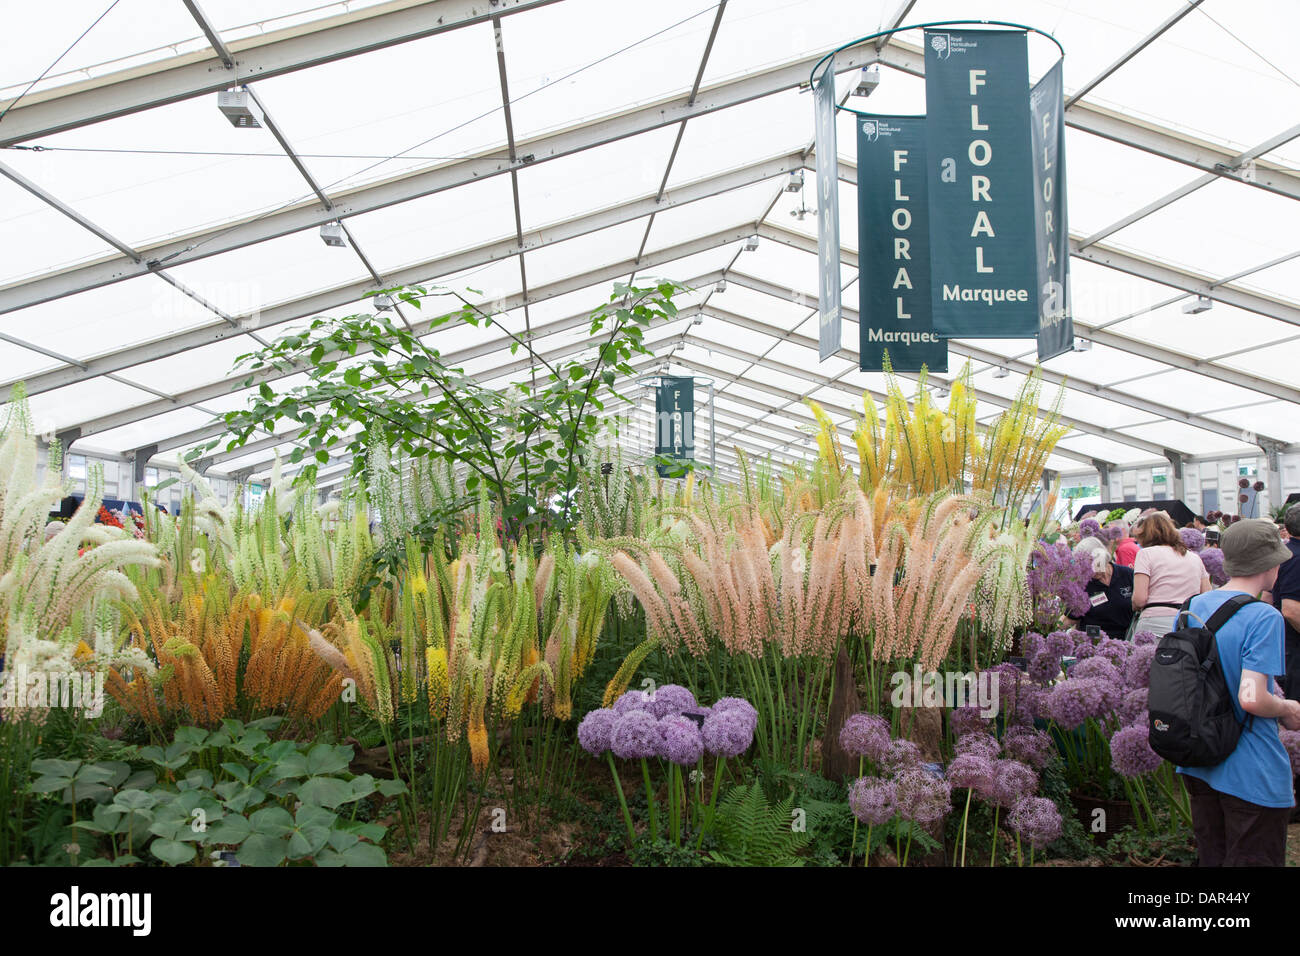 Internal view of the Floral Marquee at the Hampton Court Flower Show 2013 with Eremus and Allium flowers in the foreground Stock Photo